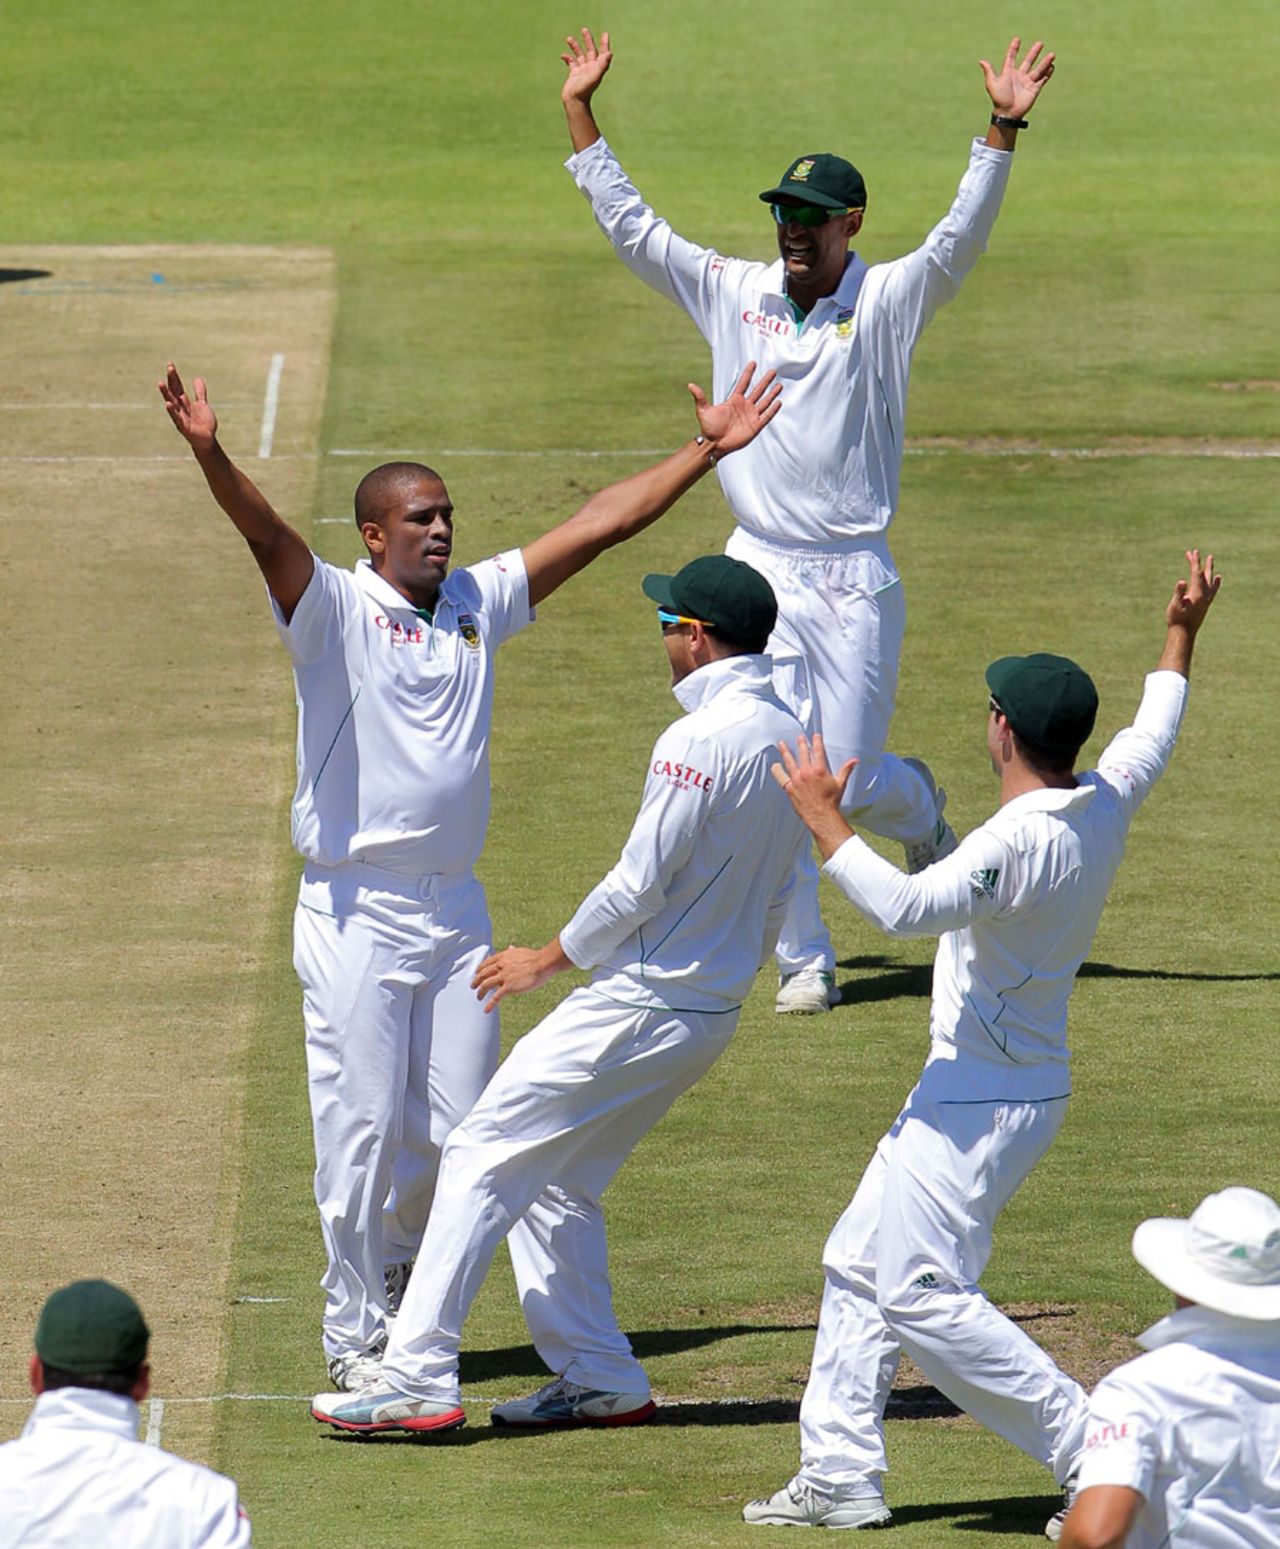 South Africa get together after a wicket, South Africa v New Zealand, 1st Test, Cape Town, 1st day, January 2, 2013